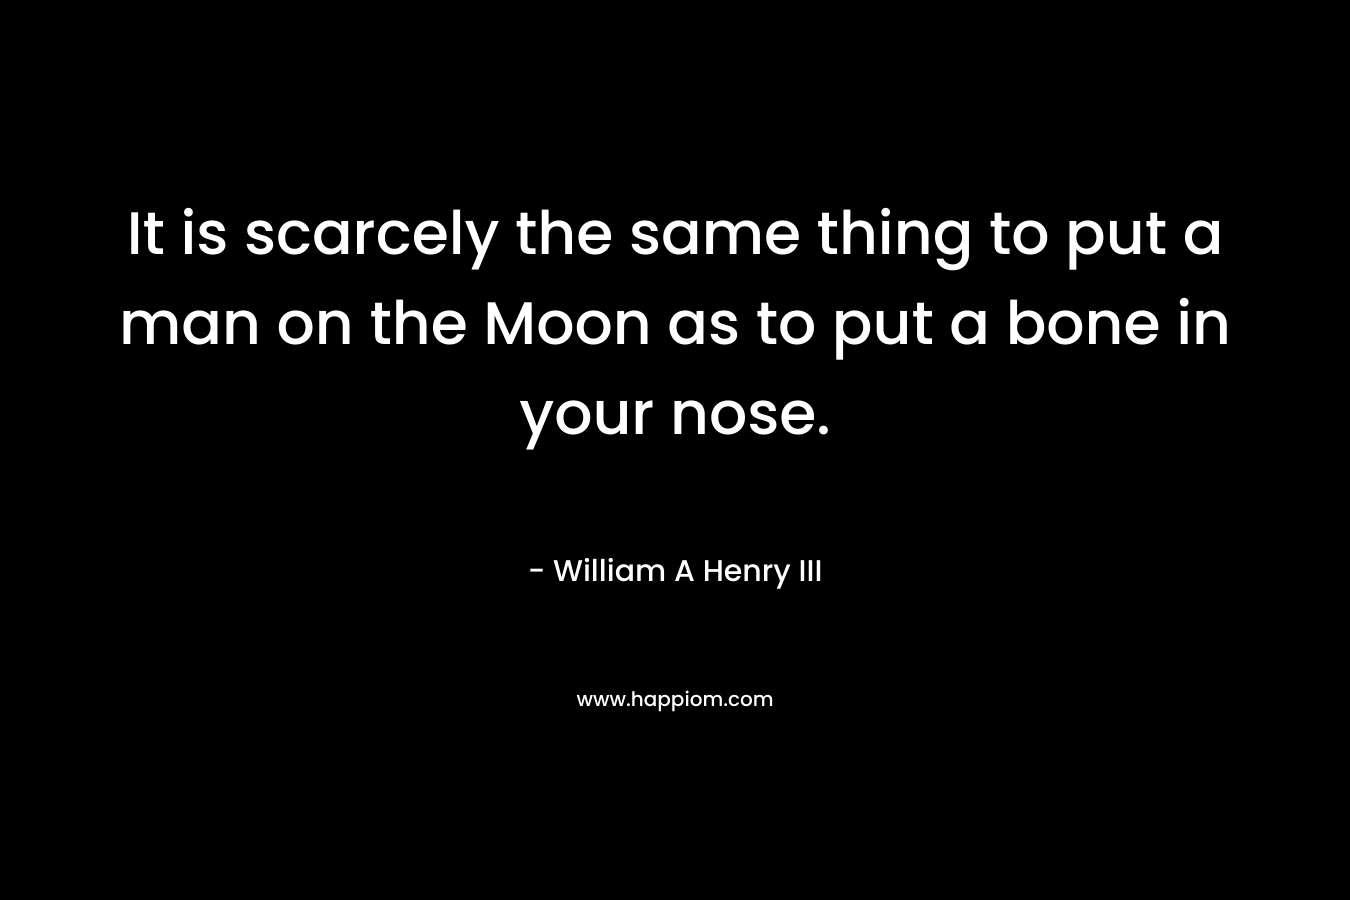 It is scarcely the same thing to put a man on the Moon as to put a bone in your nose. – William A Henry III